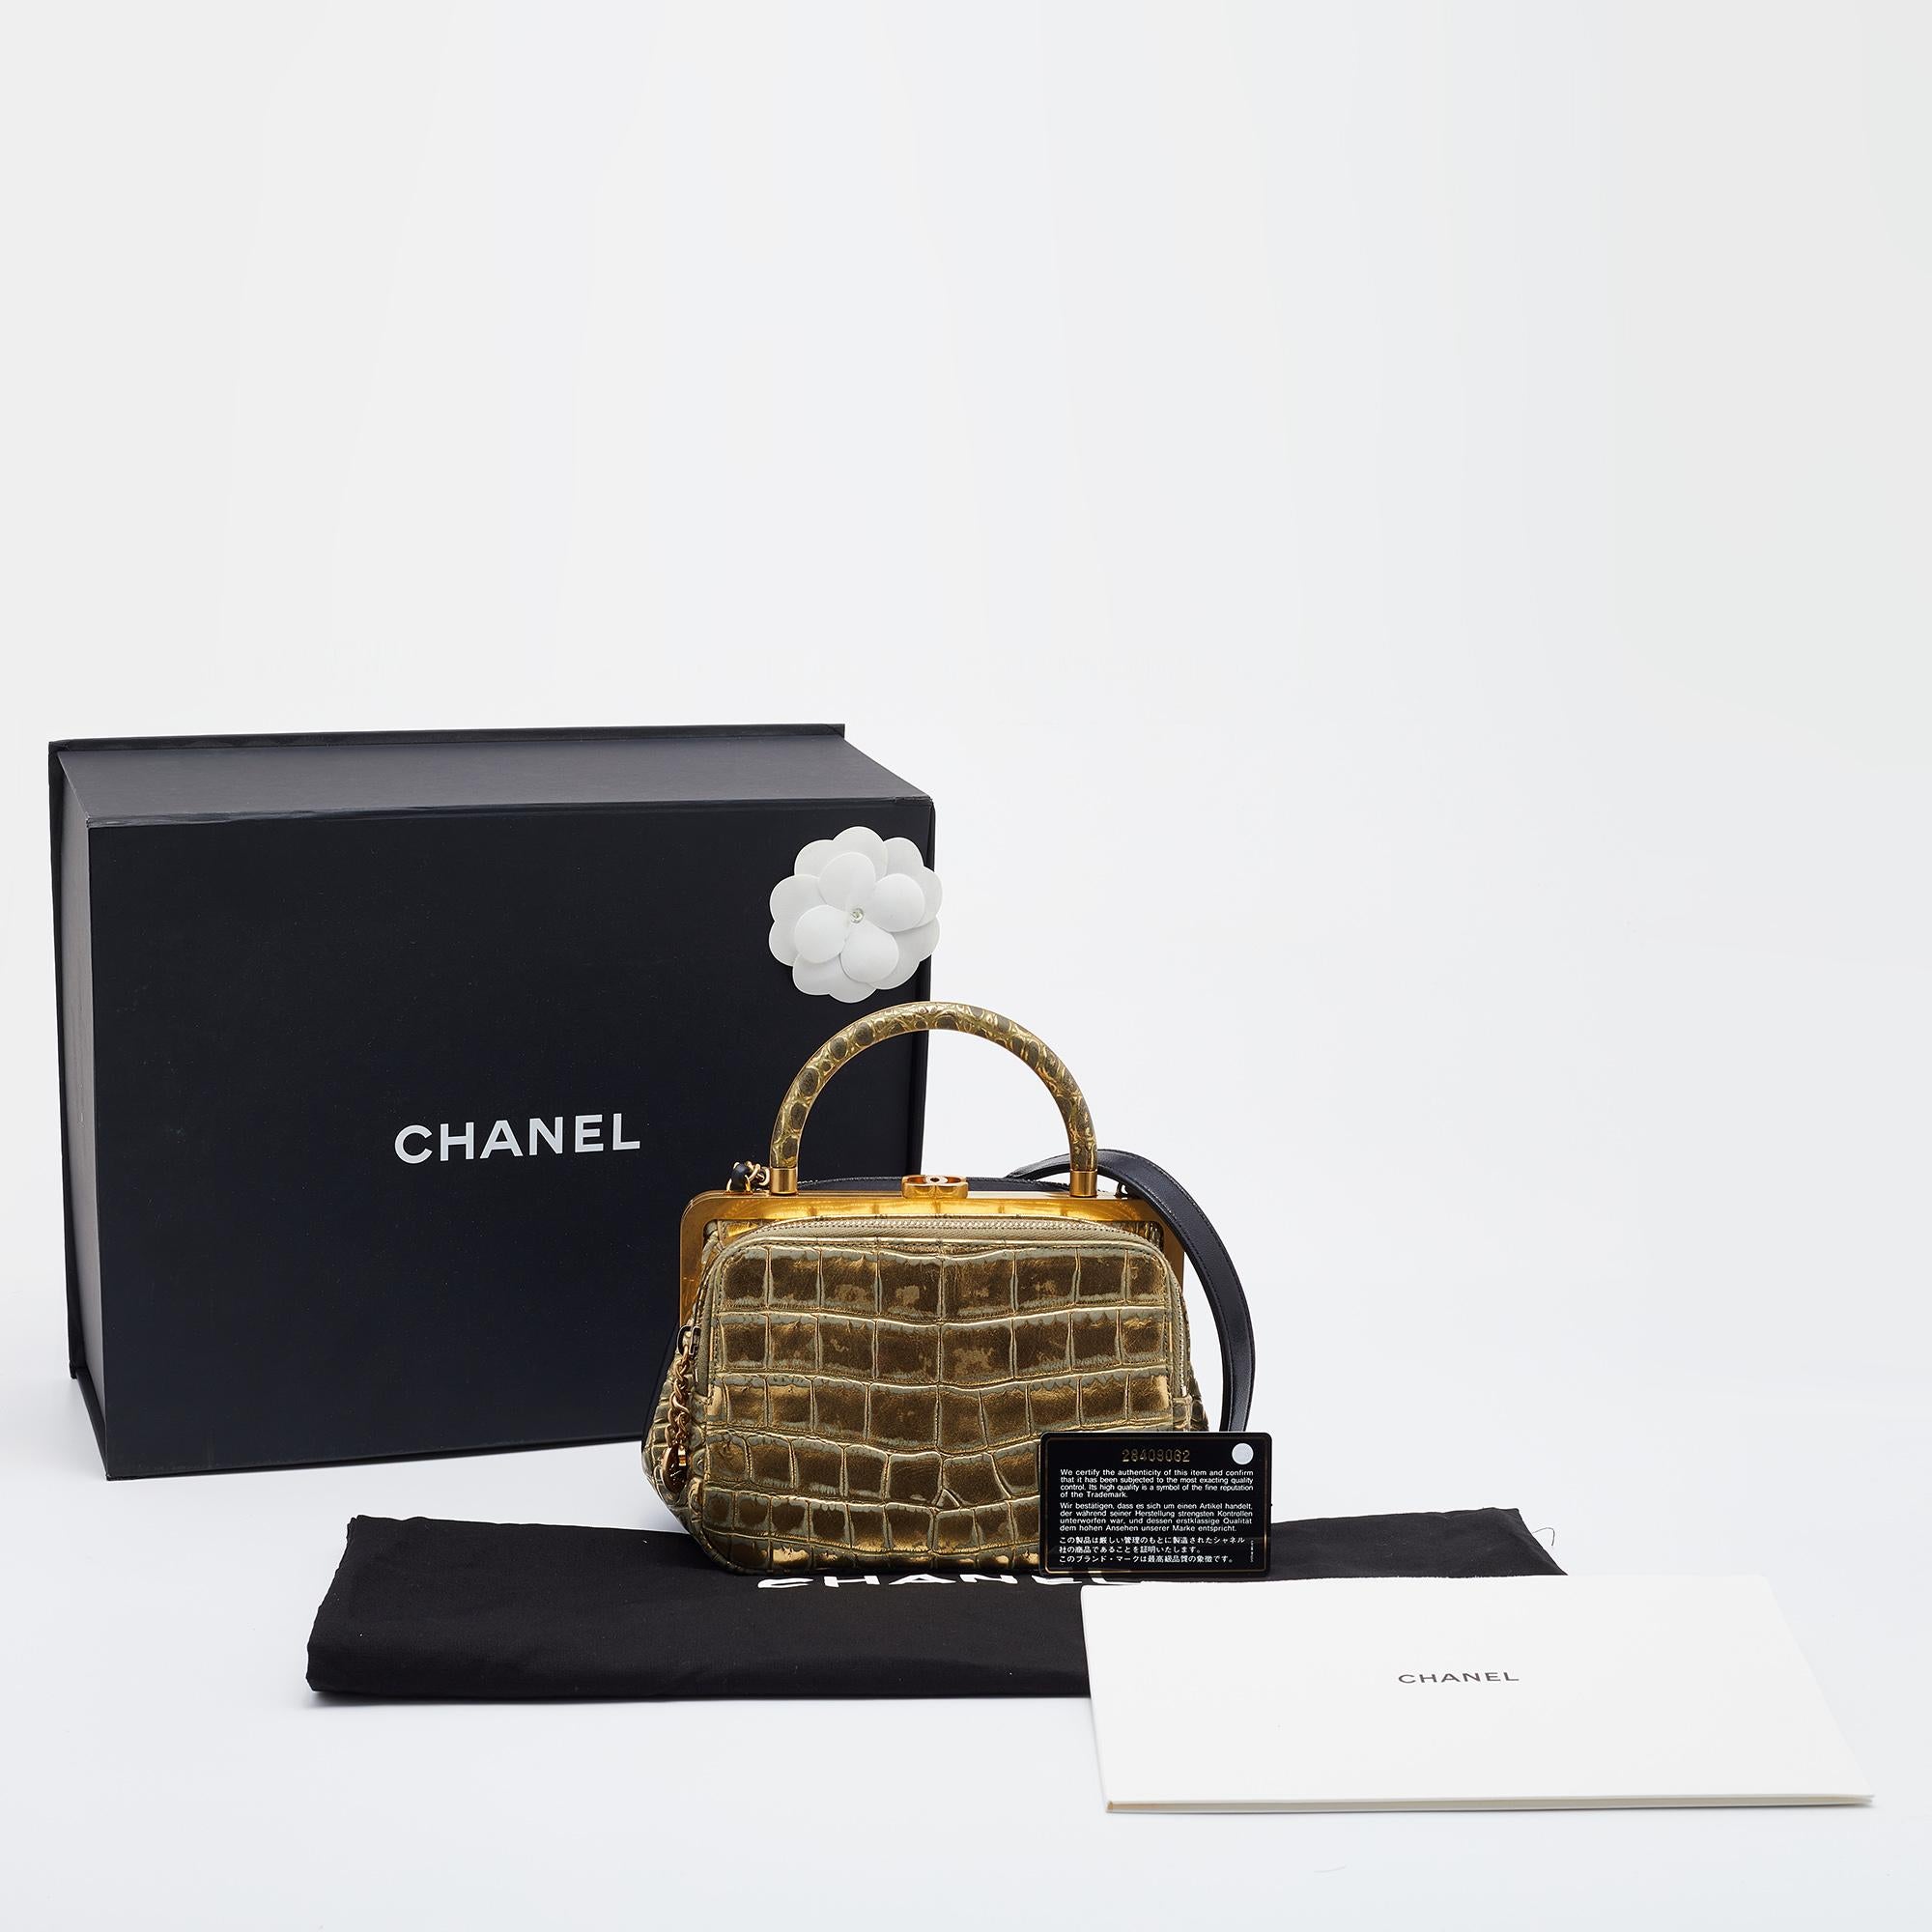 Chanel Black/Metallic Leather and Croc Embossed Small Kiss-lock Bag 4